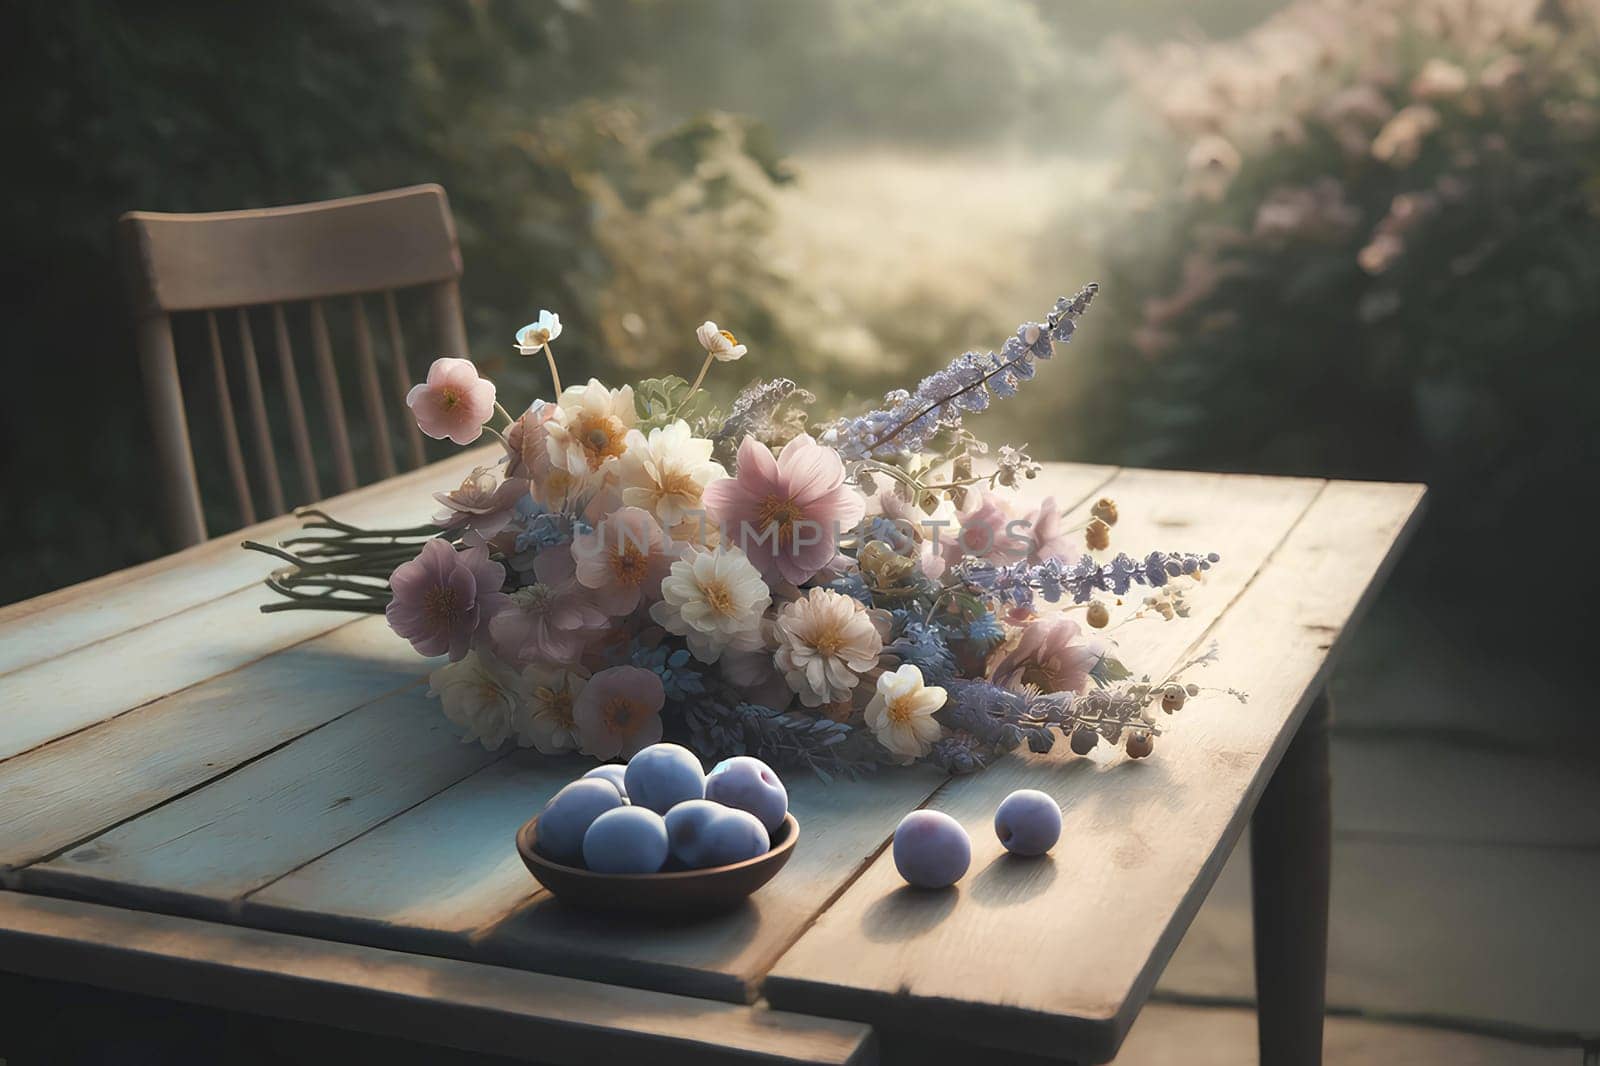 a bouquet of pastel flowers and a dish with plums on a wooden table in the garden.